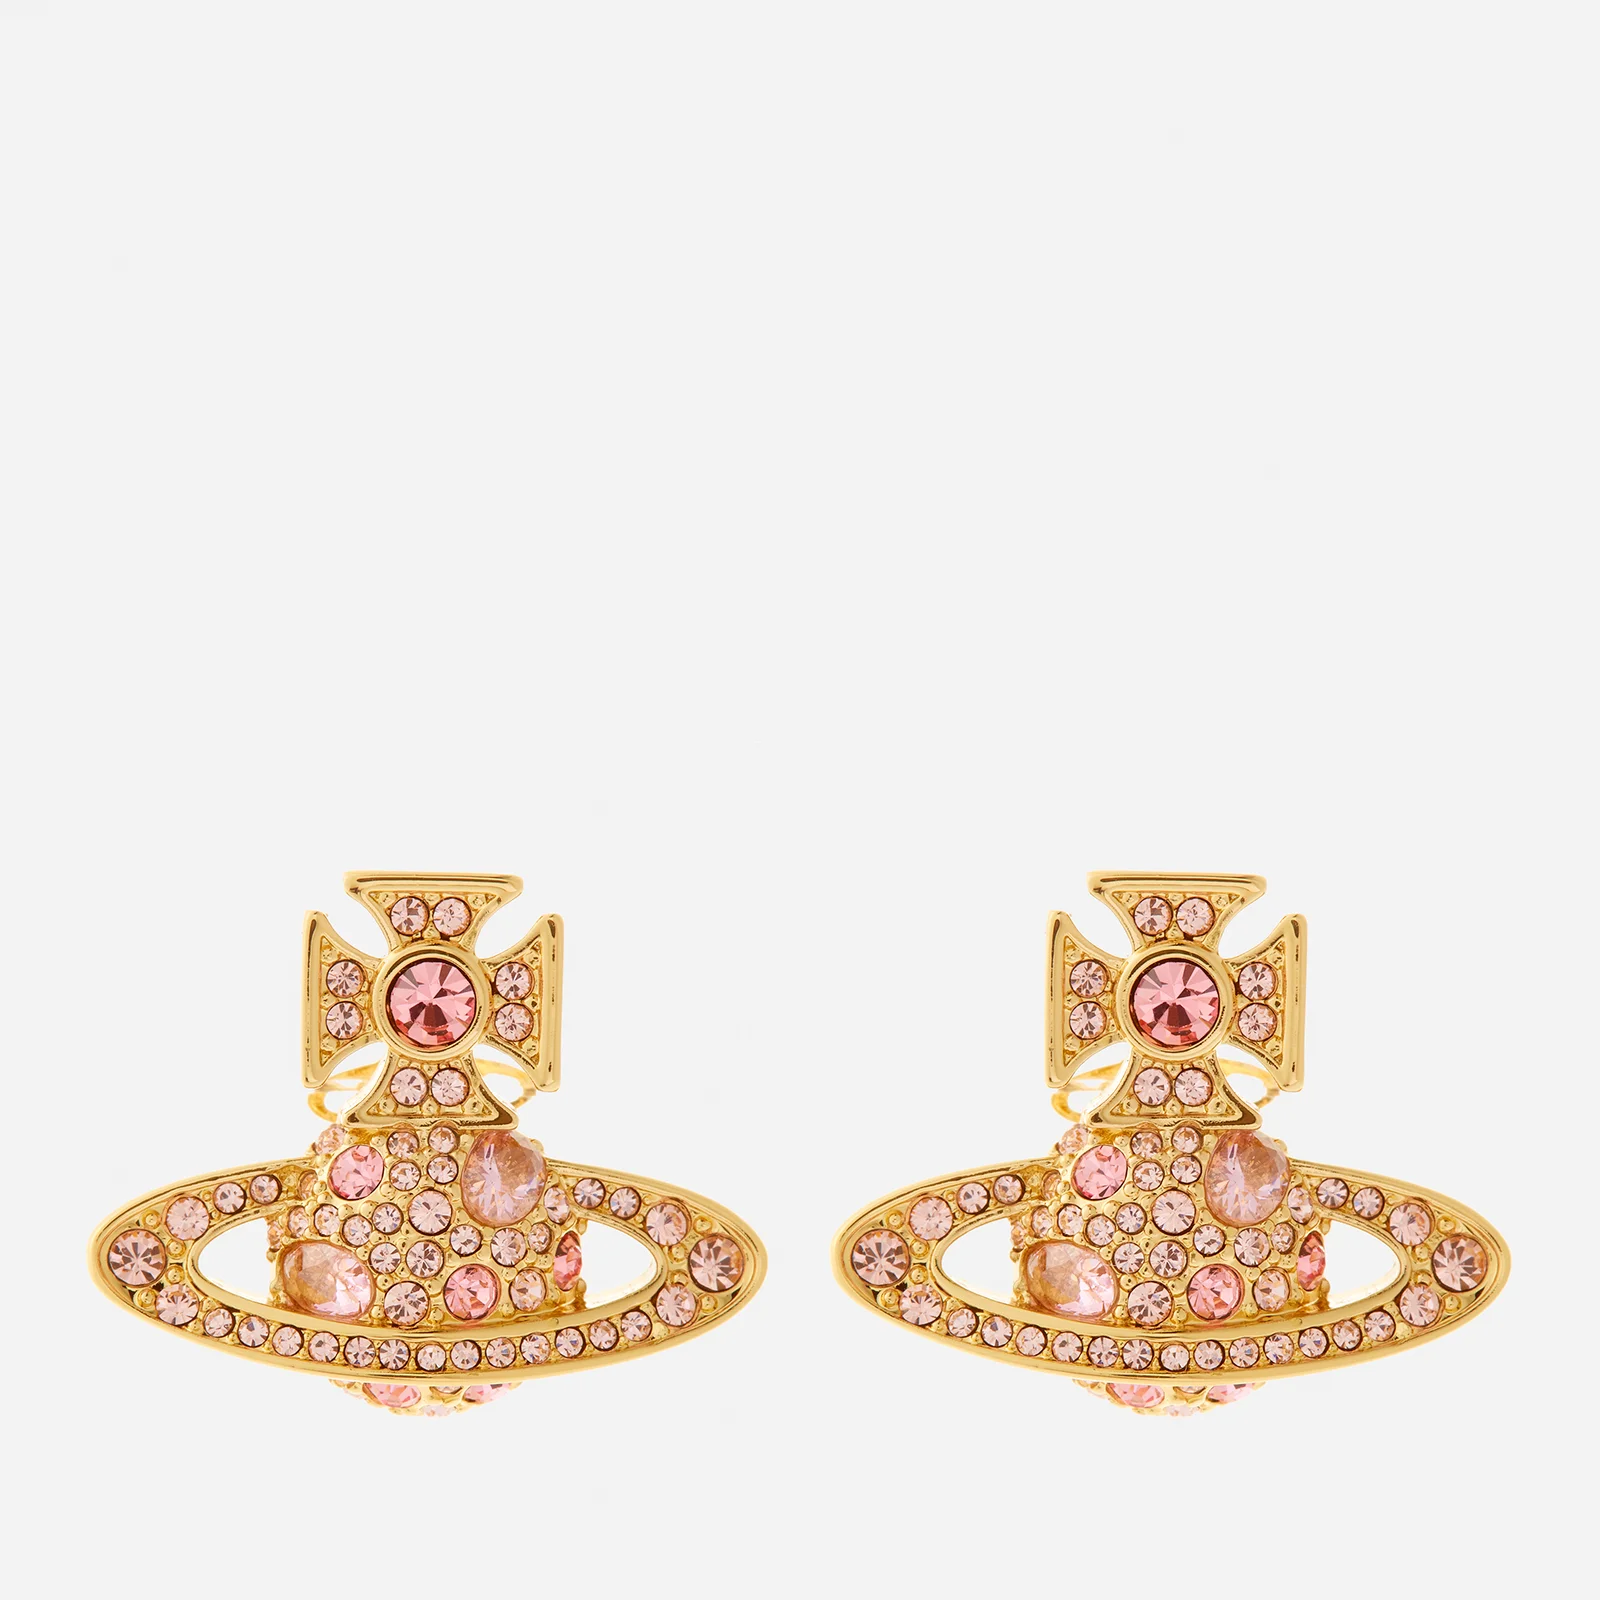 Vivienne Westwood Francette Bas Relief Gold-Tone and Crystal Earrings Image 1